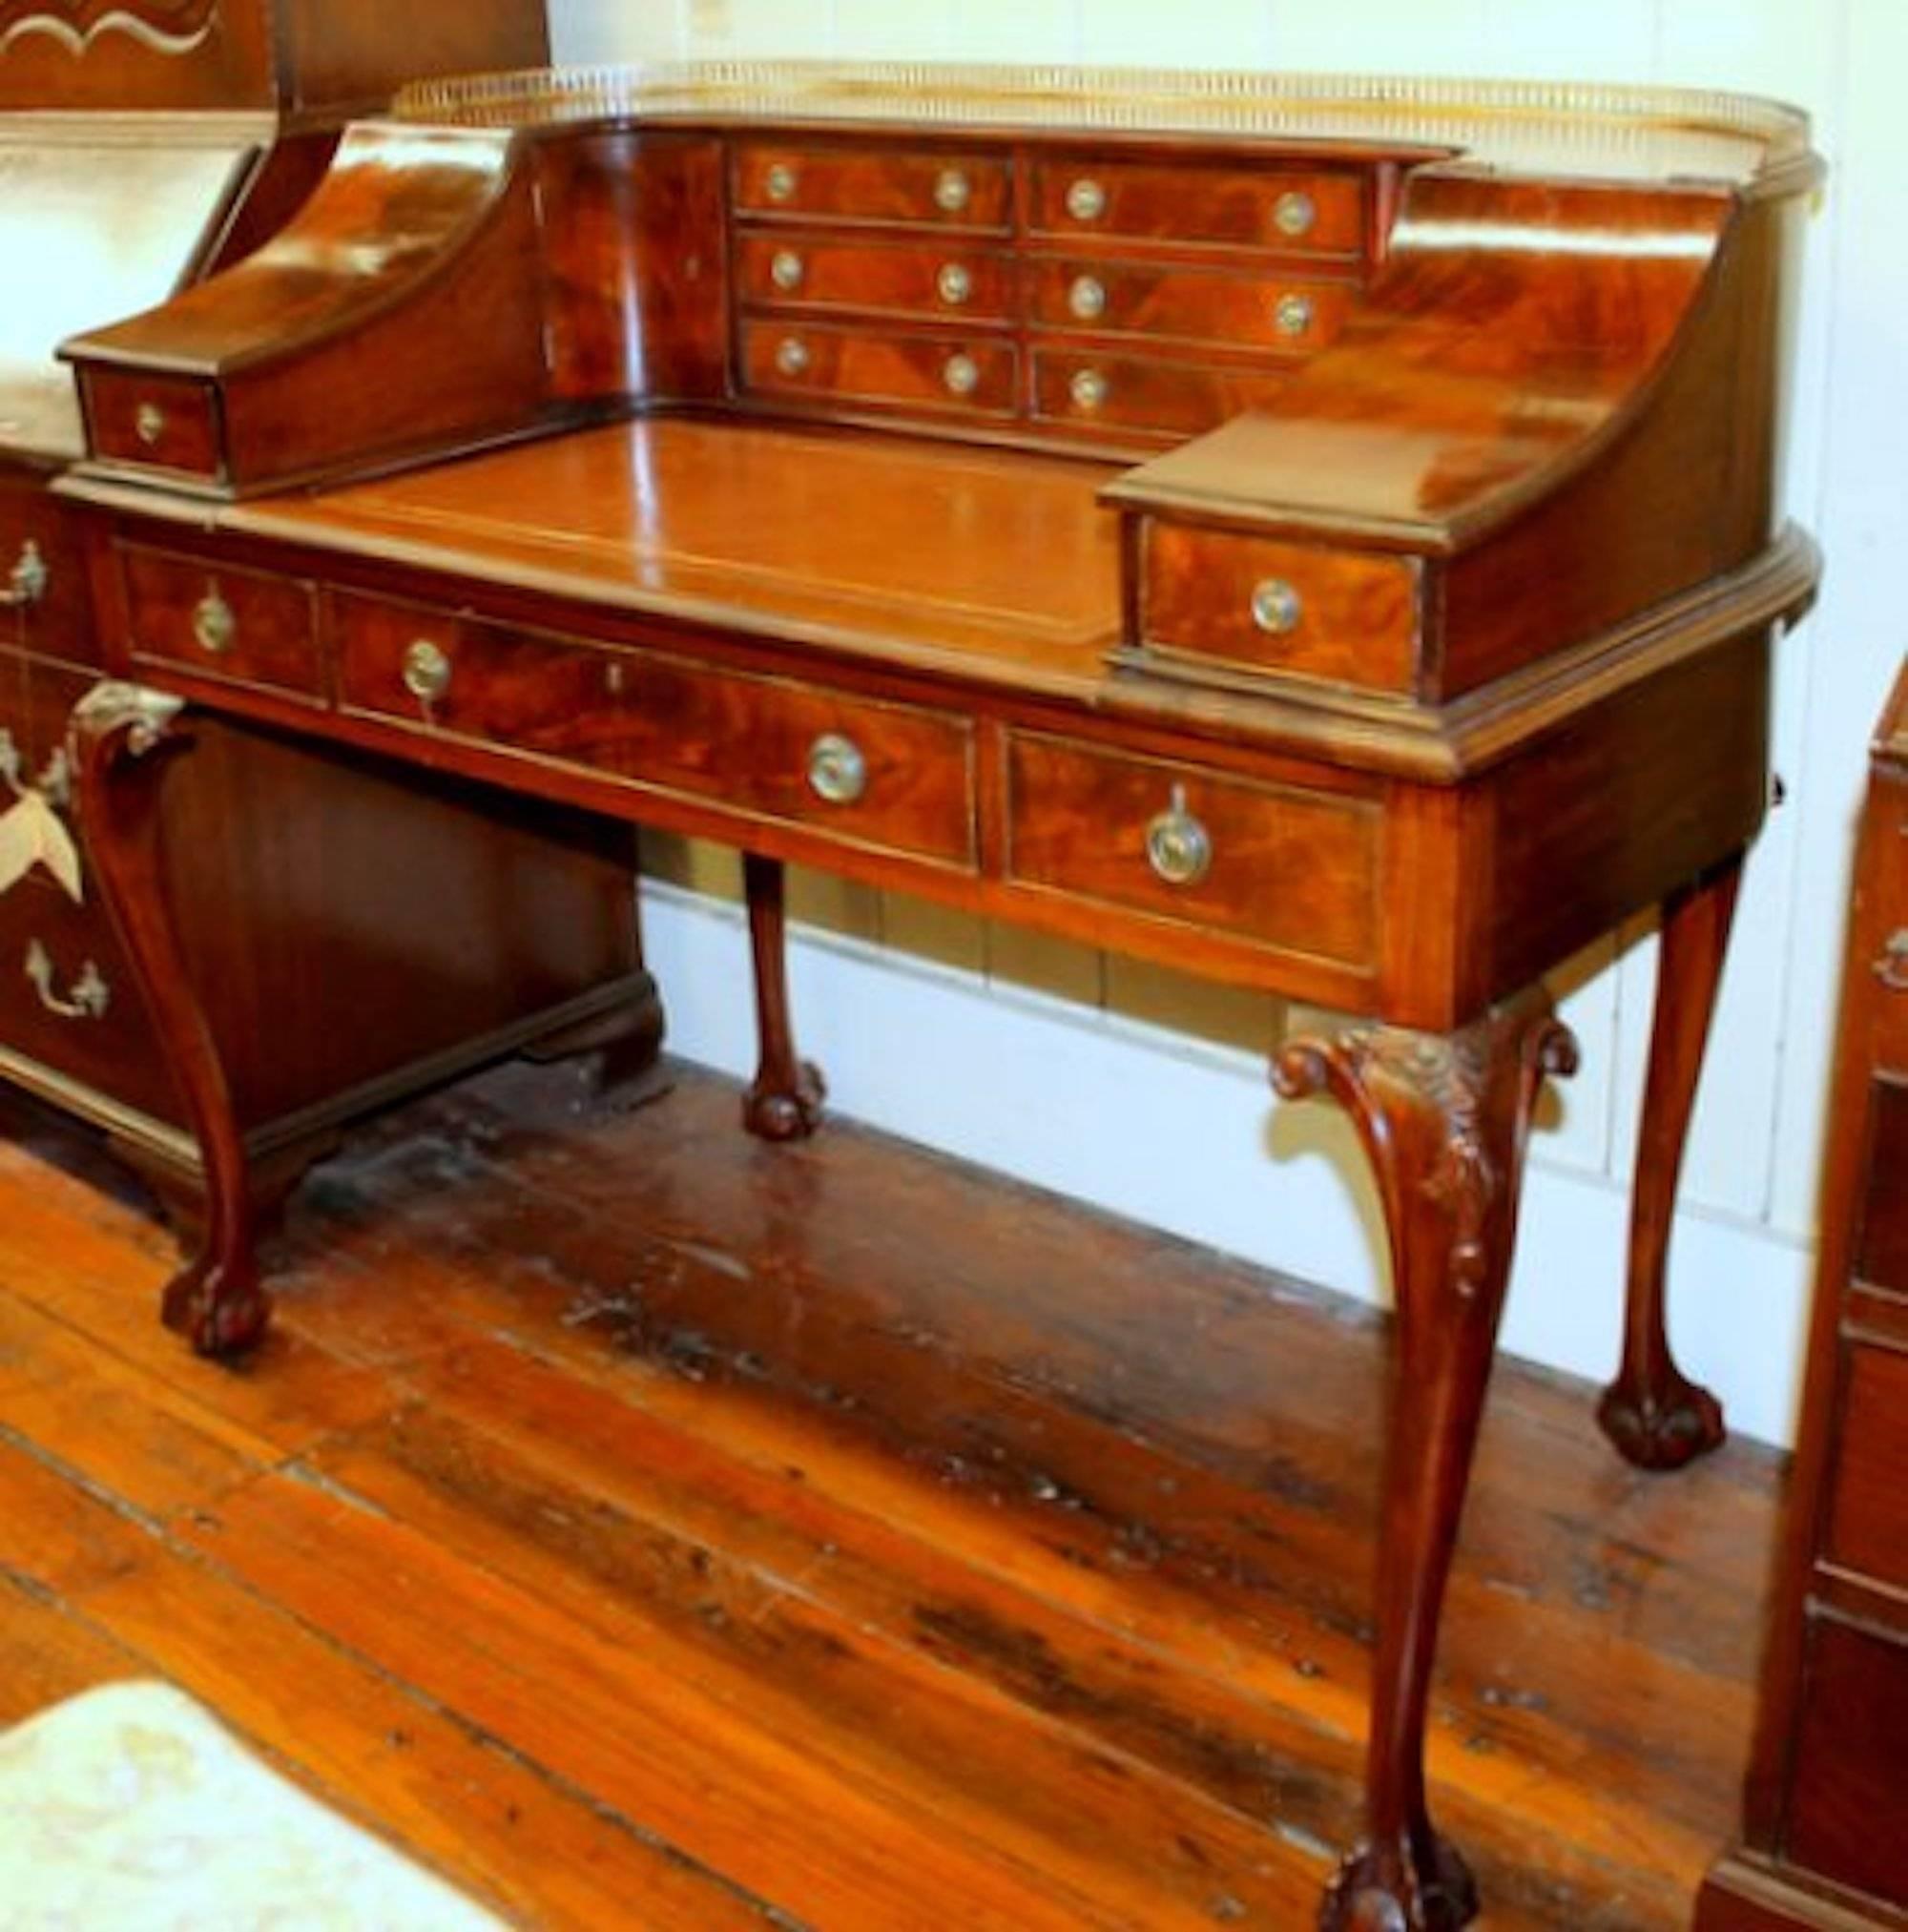 Exceptional quality antique English Chippendale style hand-carved flame mahogany Carlton House desk

Measures: 23 3/4" H (kneehole clearance)

Please note handsome cabriole legs with "bellflower" carving on the knee. Also note the